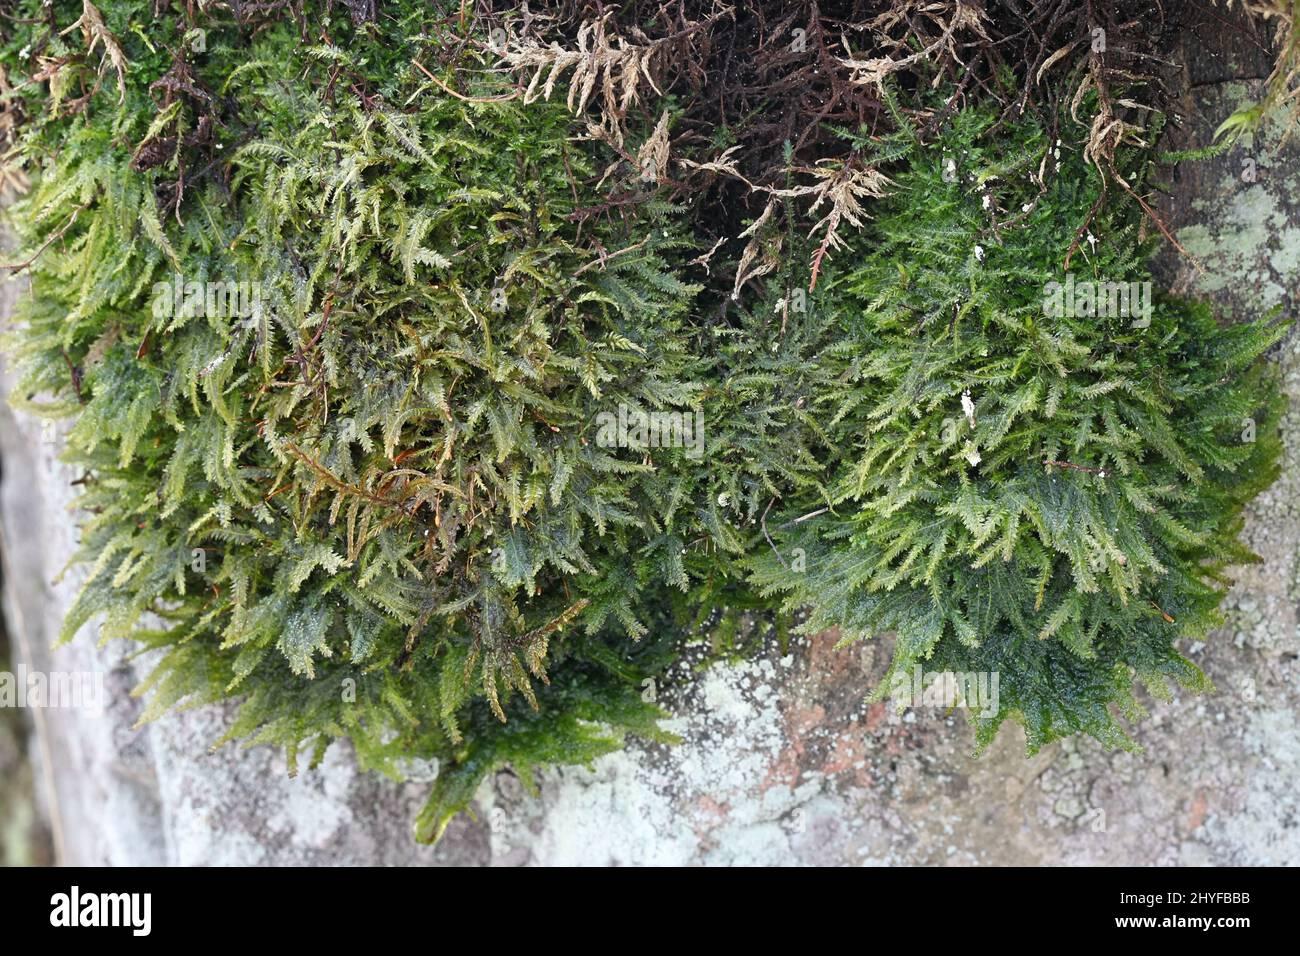 plagiothecium-denticulatum-commonly-known-as-toothed-plagiothecium-moss-growing-on-rock-surface-in-finland-2HYFBBB.jpg